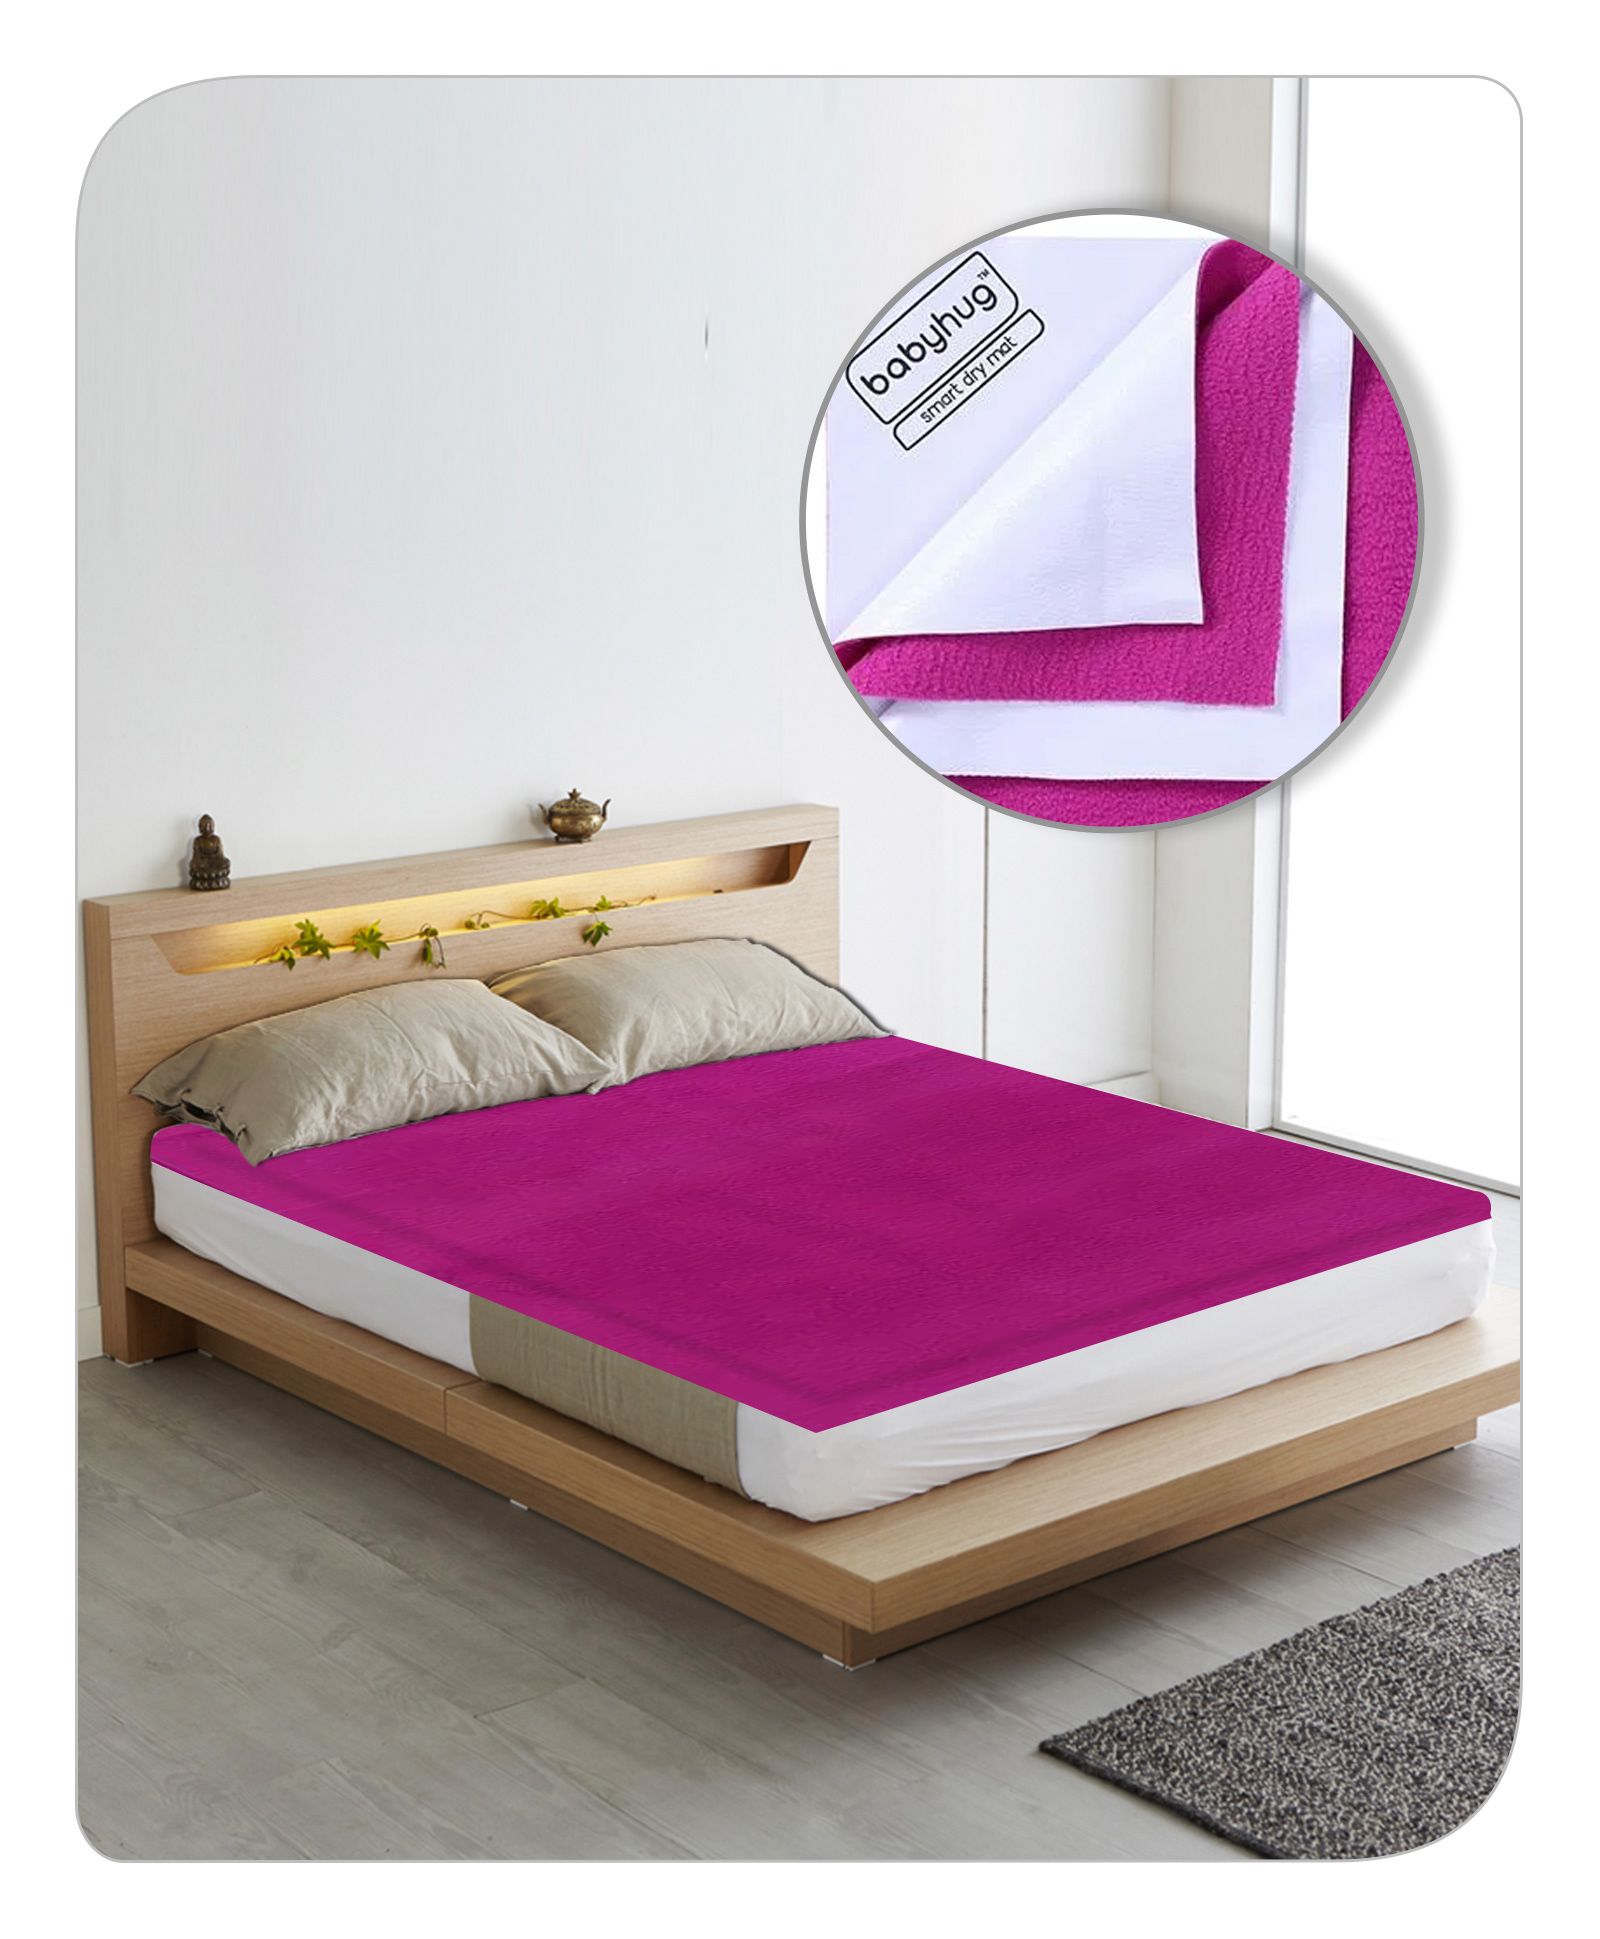 Babyhug Smart Dry Bed Protector Sheet - Orchid Online in at Best Price from - 1206000